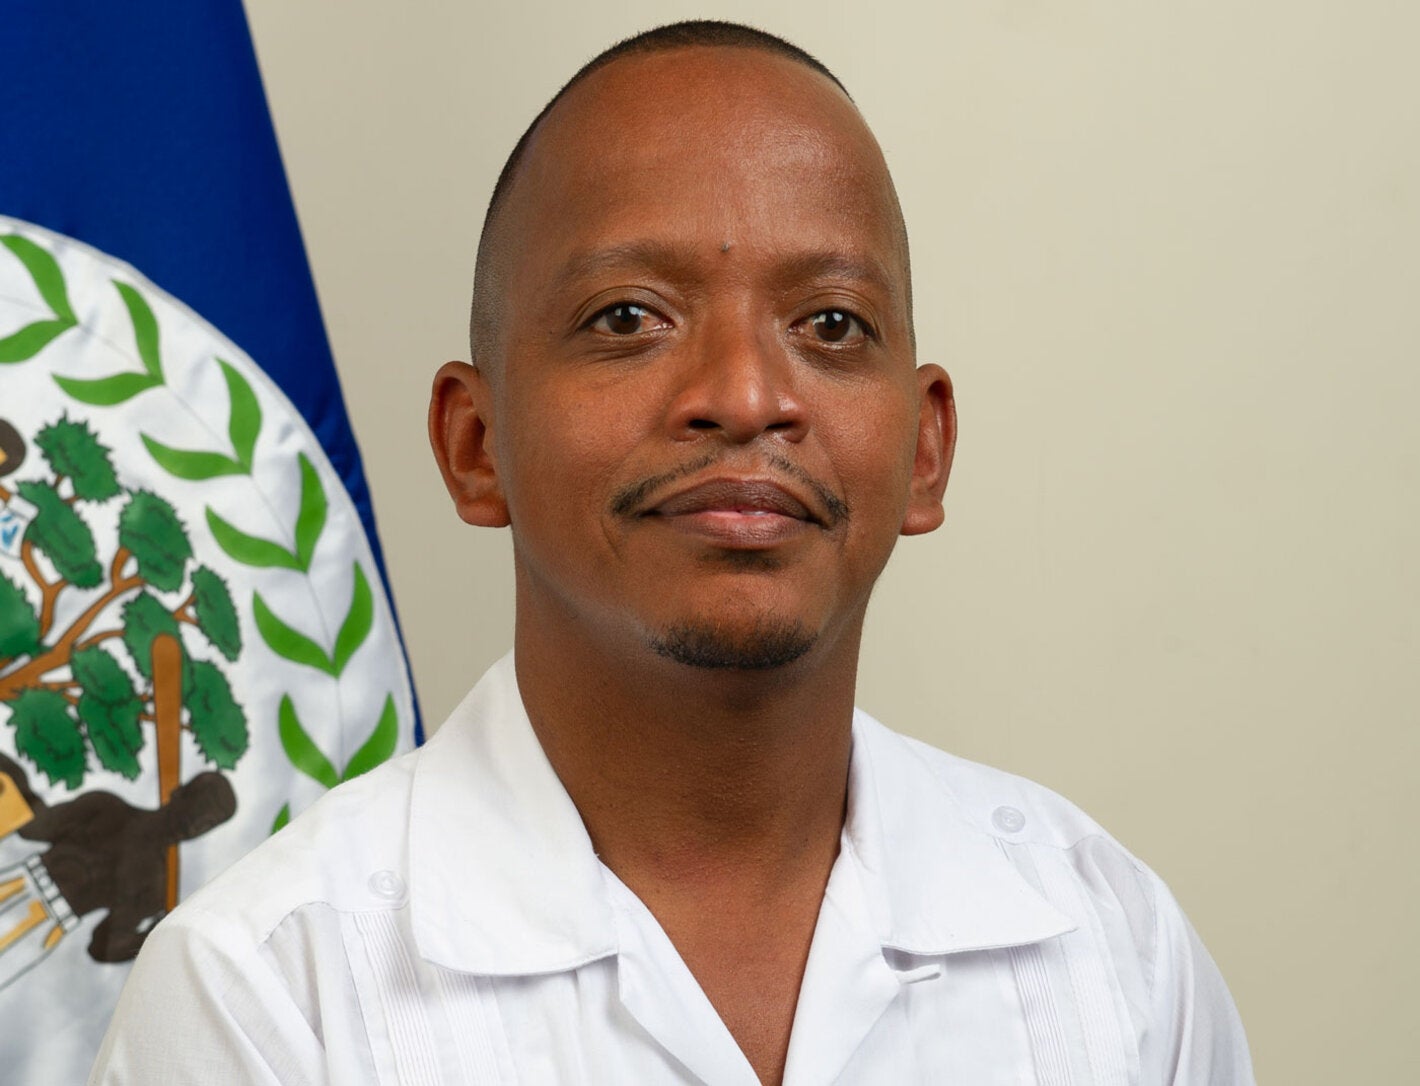 Hon. Kevin Bernard, Minister of the Ministry of Health and Wellness in Belize